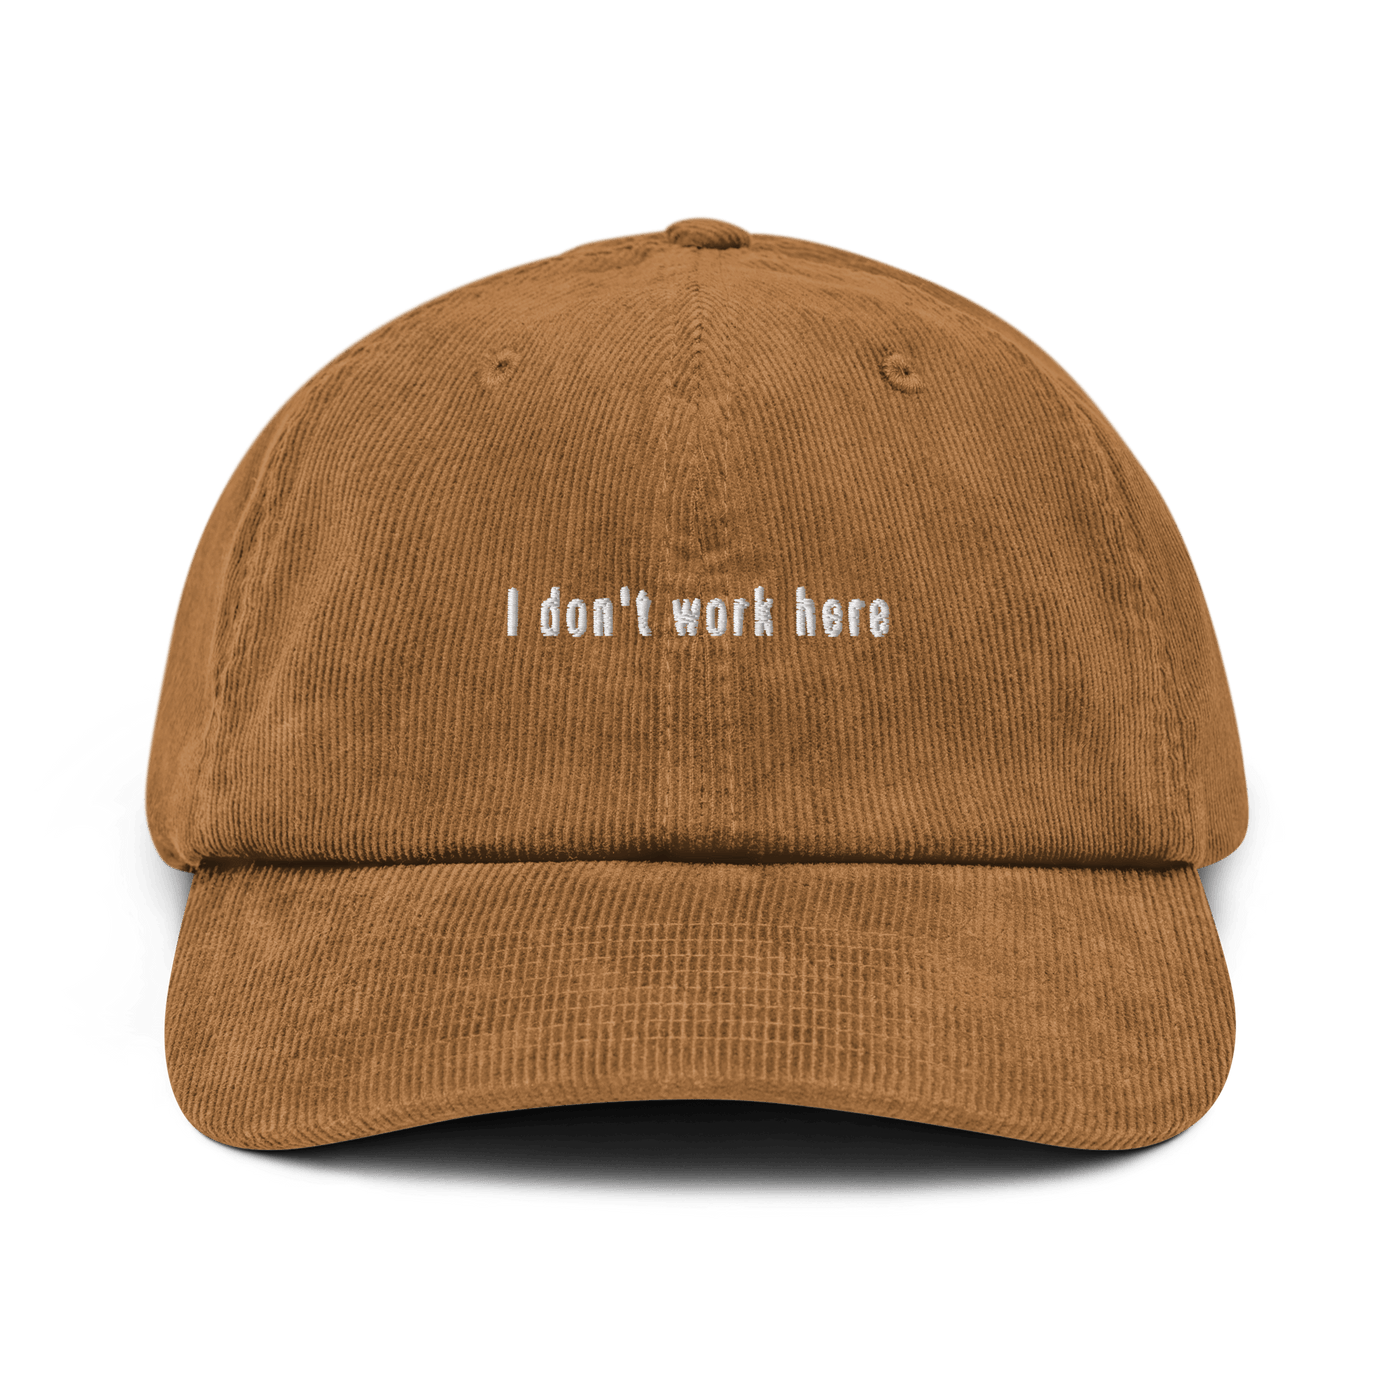 I don't work here Corduroy hat - Camel - - Just Another Cap Store